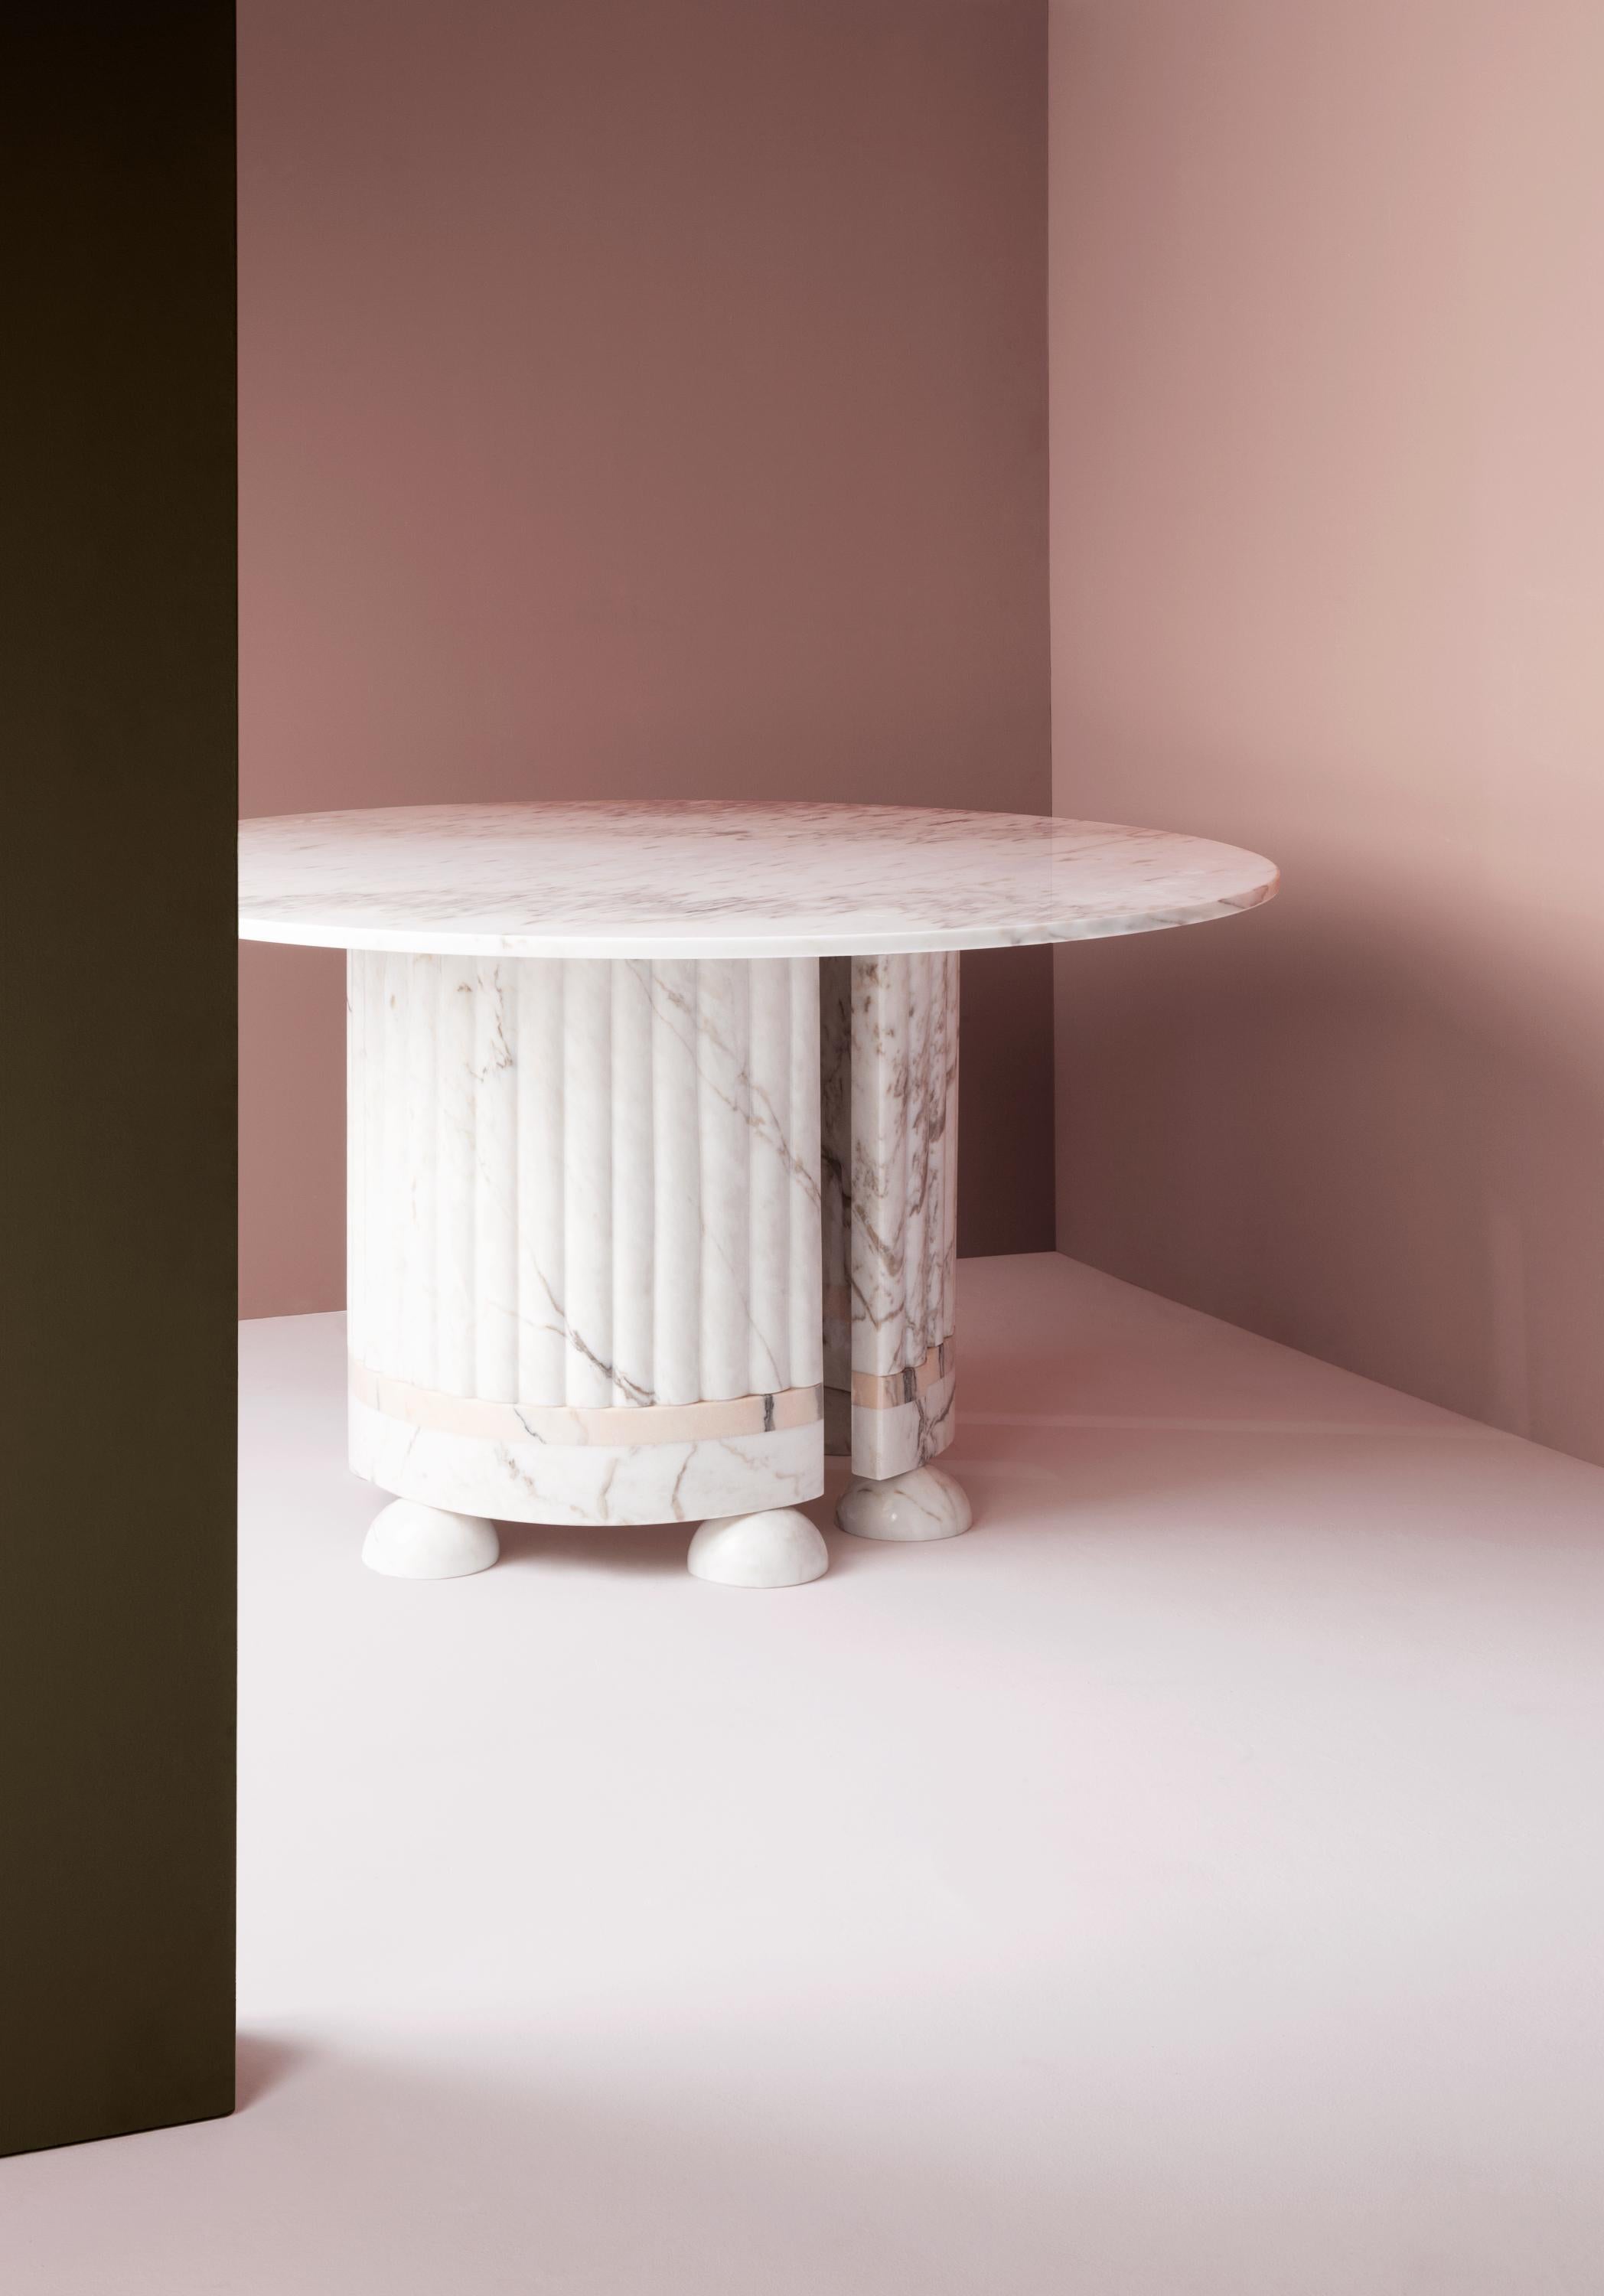 Memphis dinner table by Dooq
Measures: Ø 130 cm 51”
H 77 cm 30”

Materials: estremoz rose and white marble

Dooq is a design company dedicated to celebrate the luxury of living. Creating designs that stimulate the senses, whose conceptual